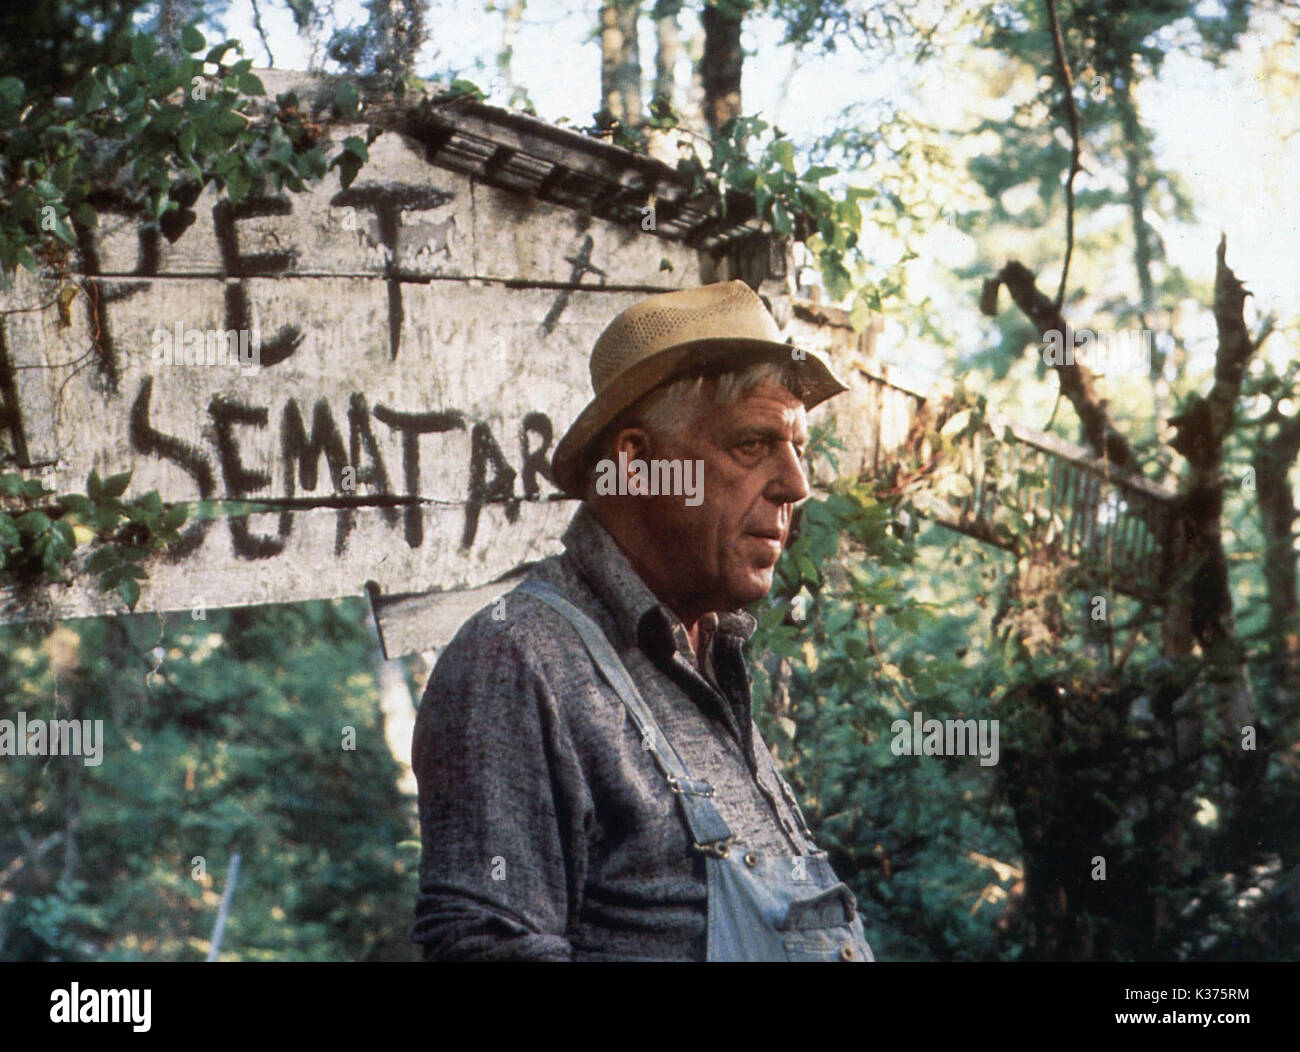 STEPHEN KING'S PET SEMATARY [US 1989] FRED GWYNNE  A PARAMOUNT PICTURE     Date: 1989 Stock Photo